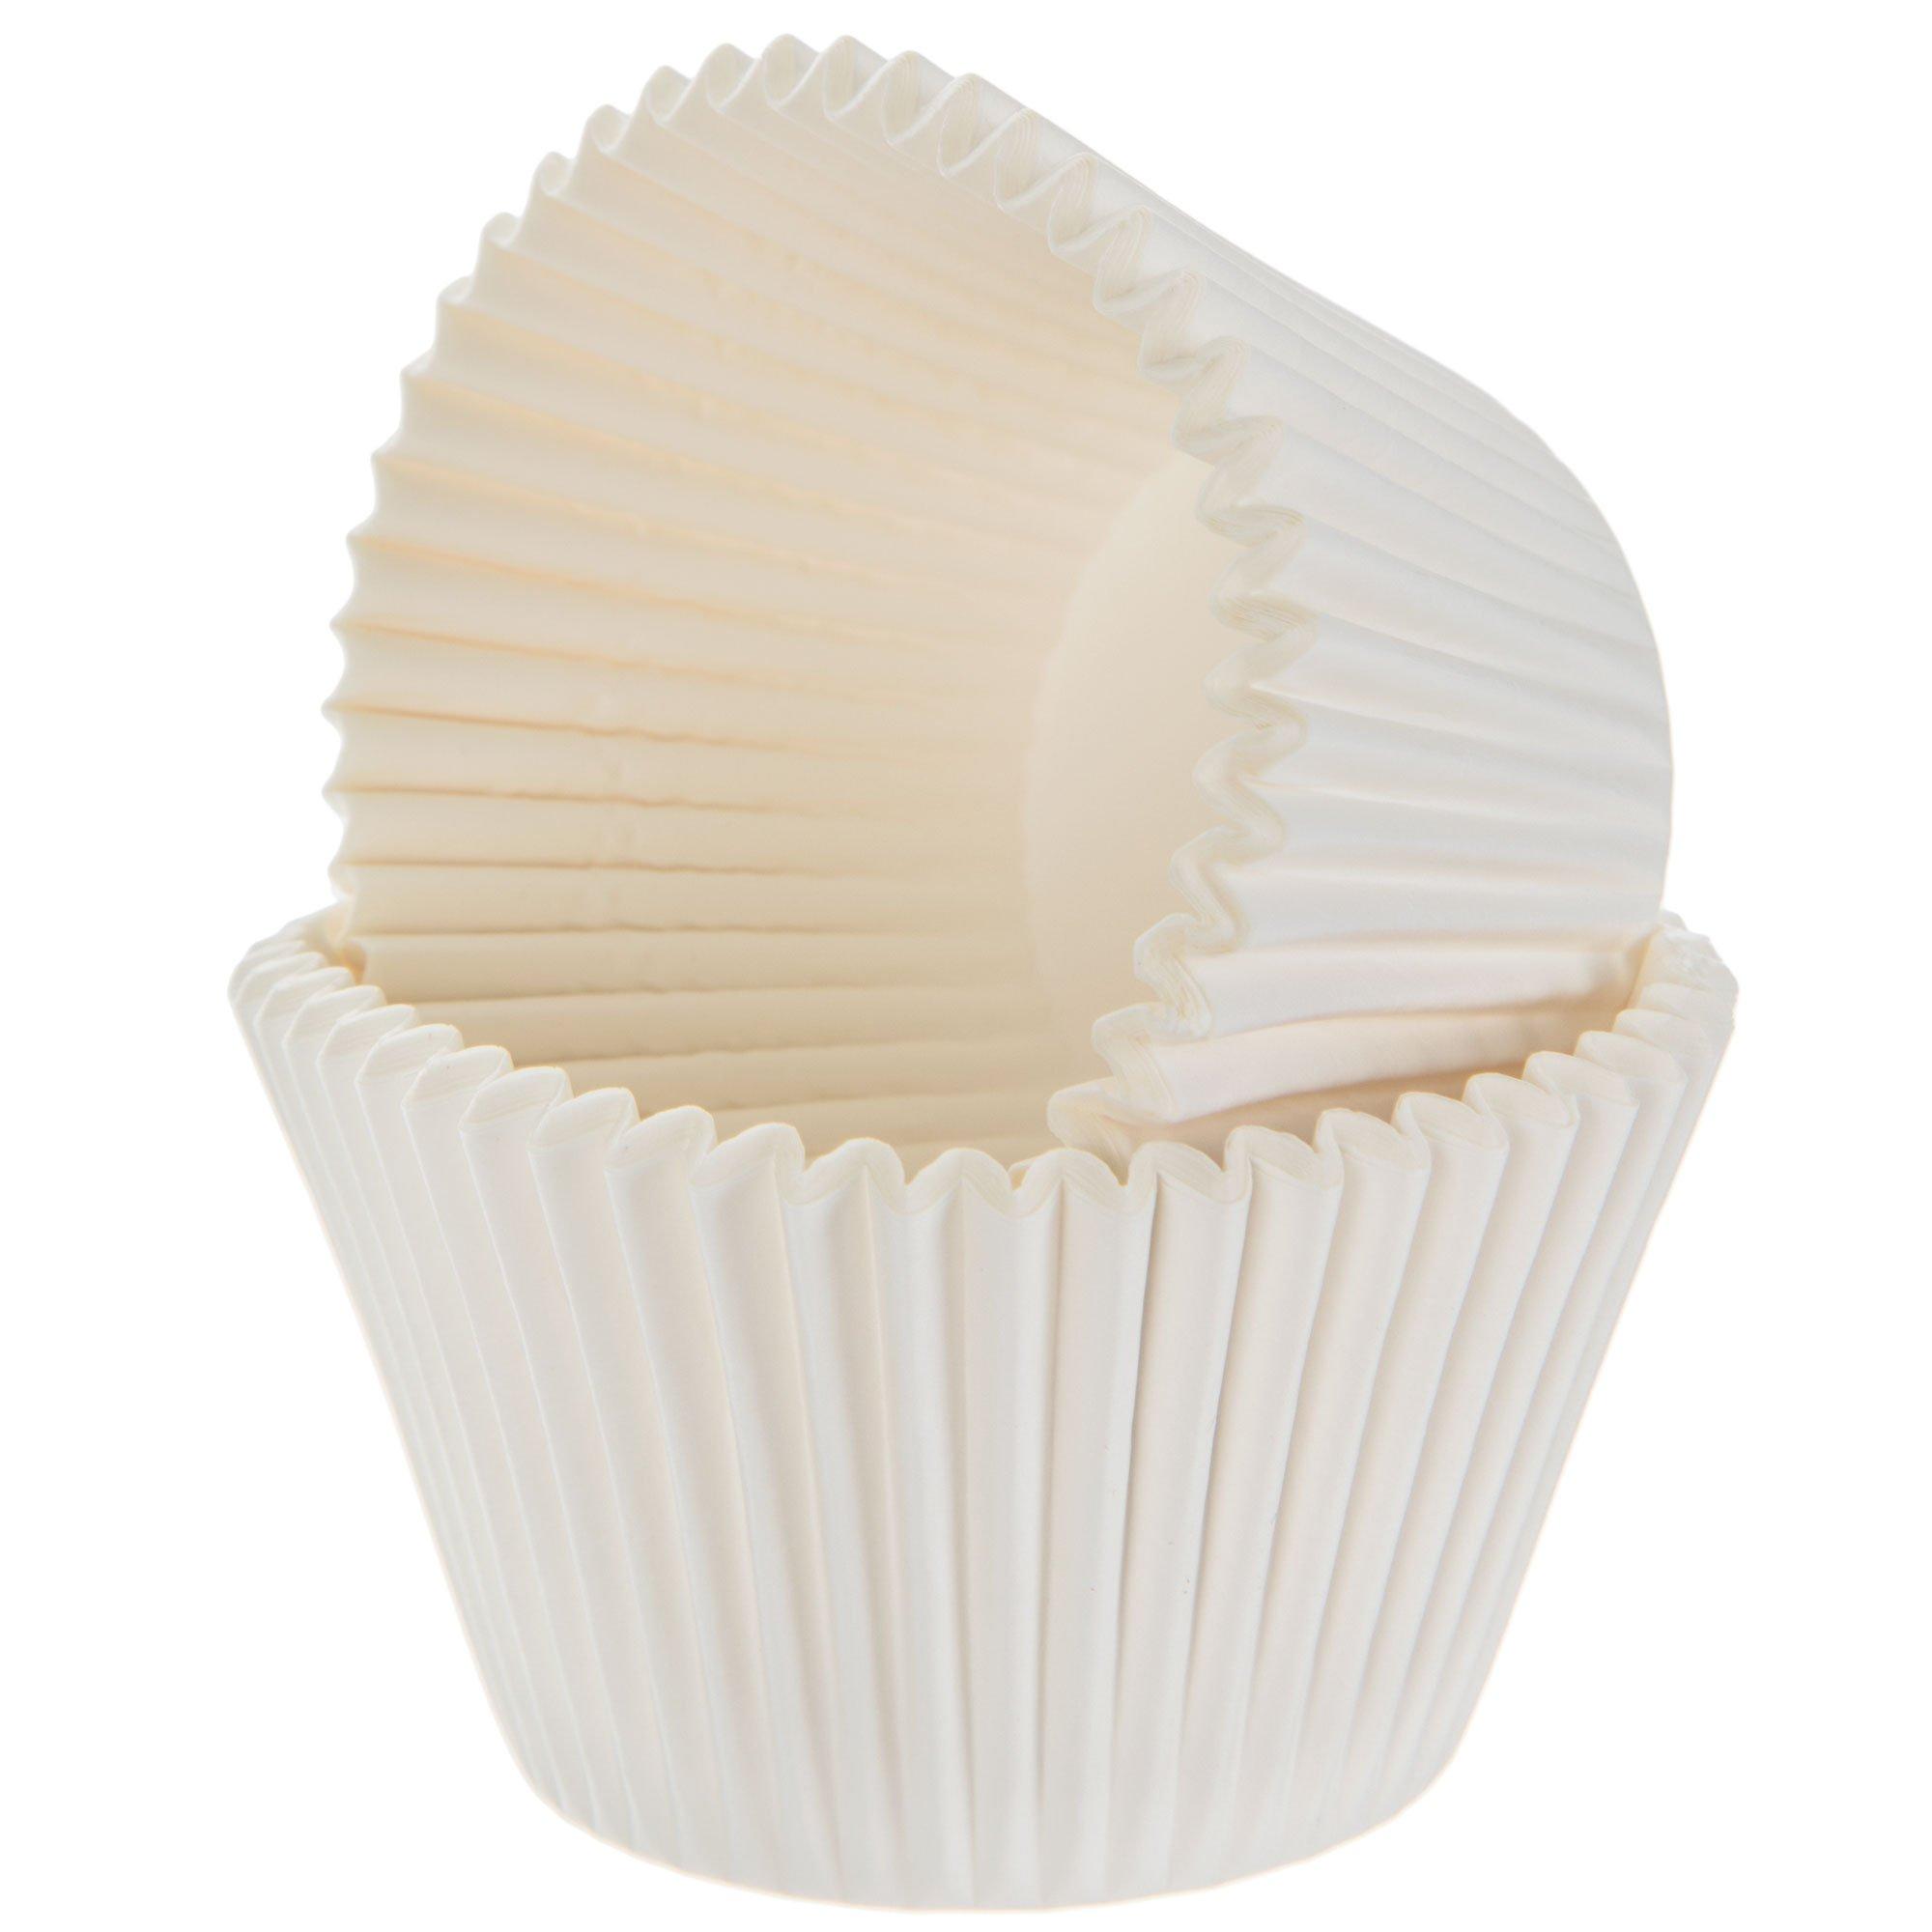 White (Transparent) Fluted Baking Cups - Jumbo Size